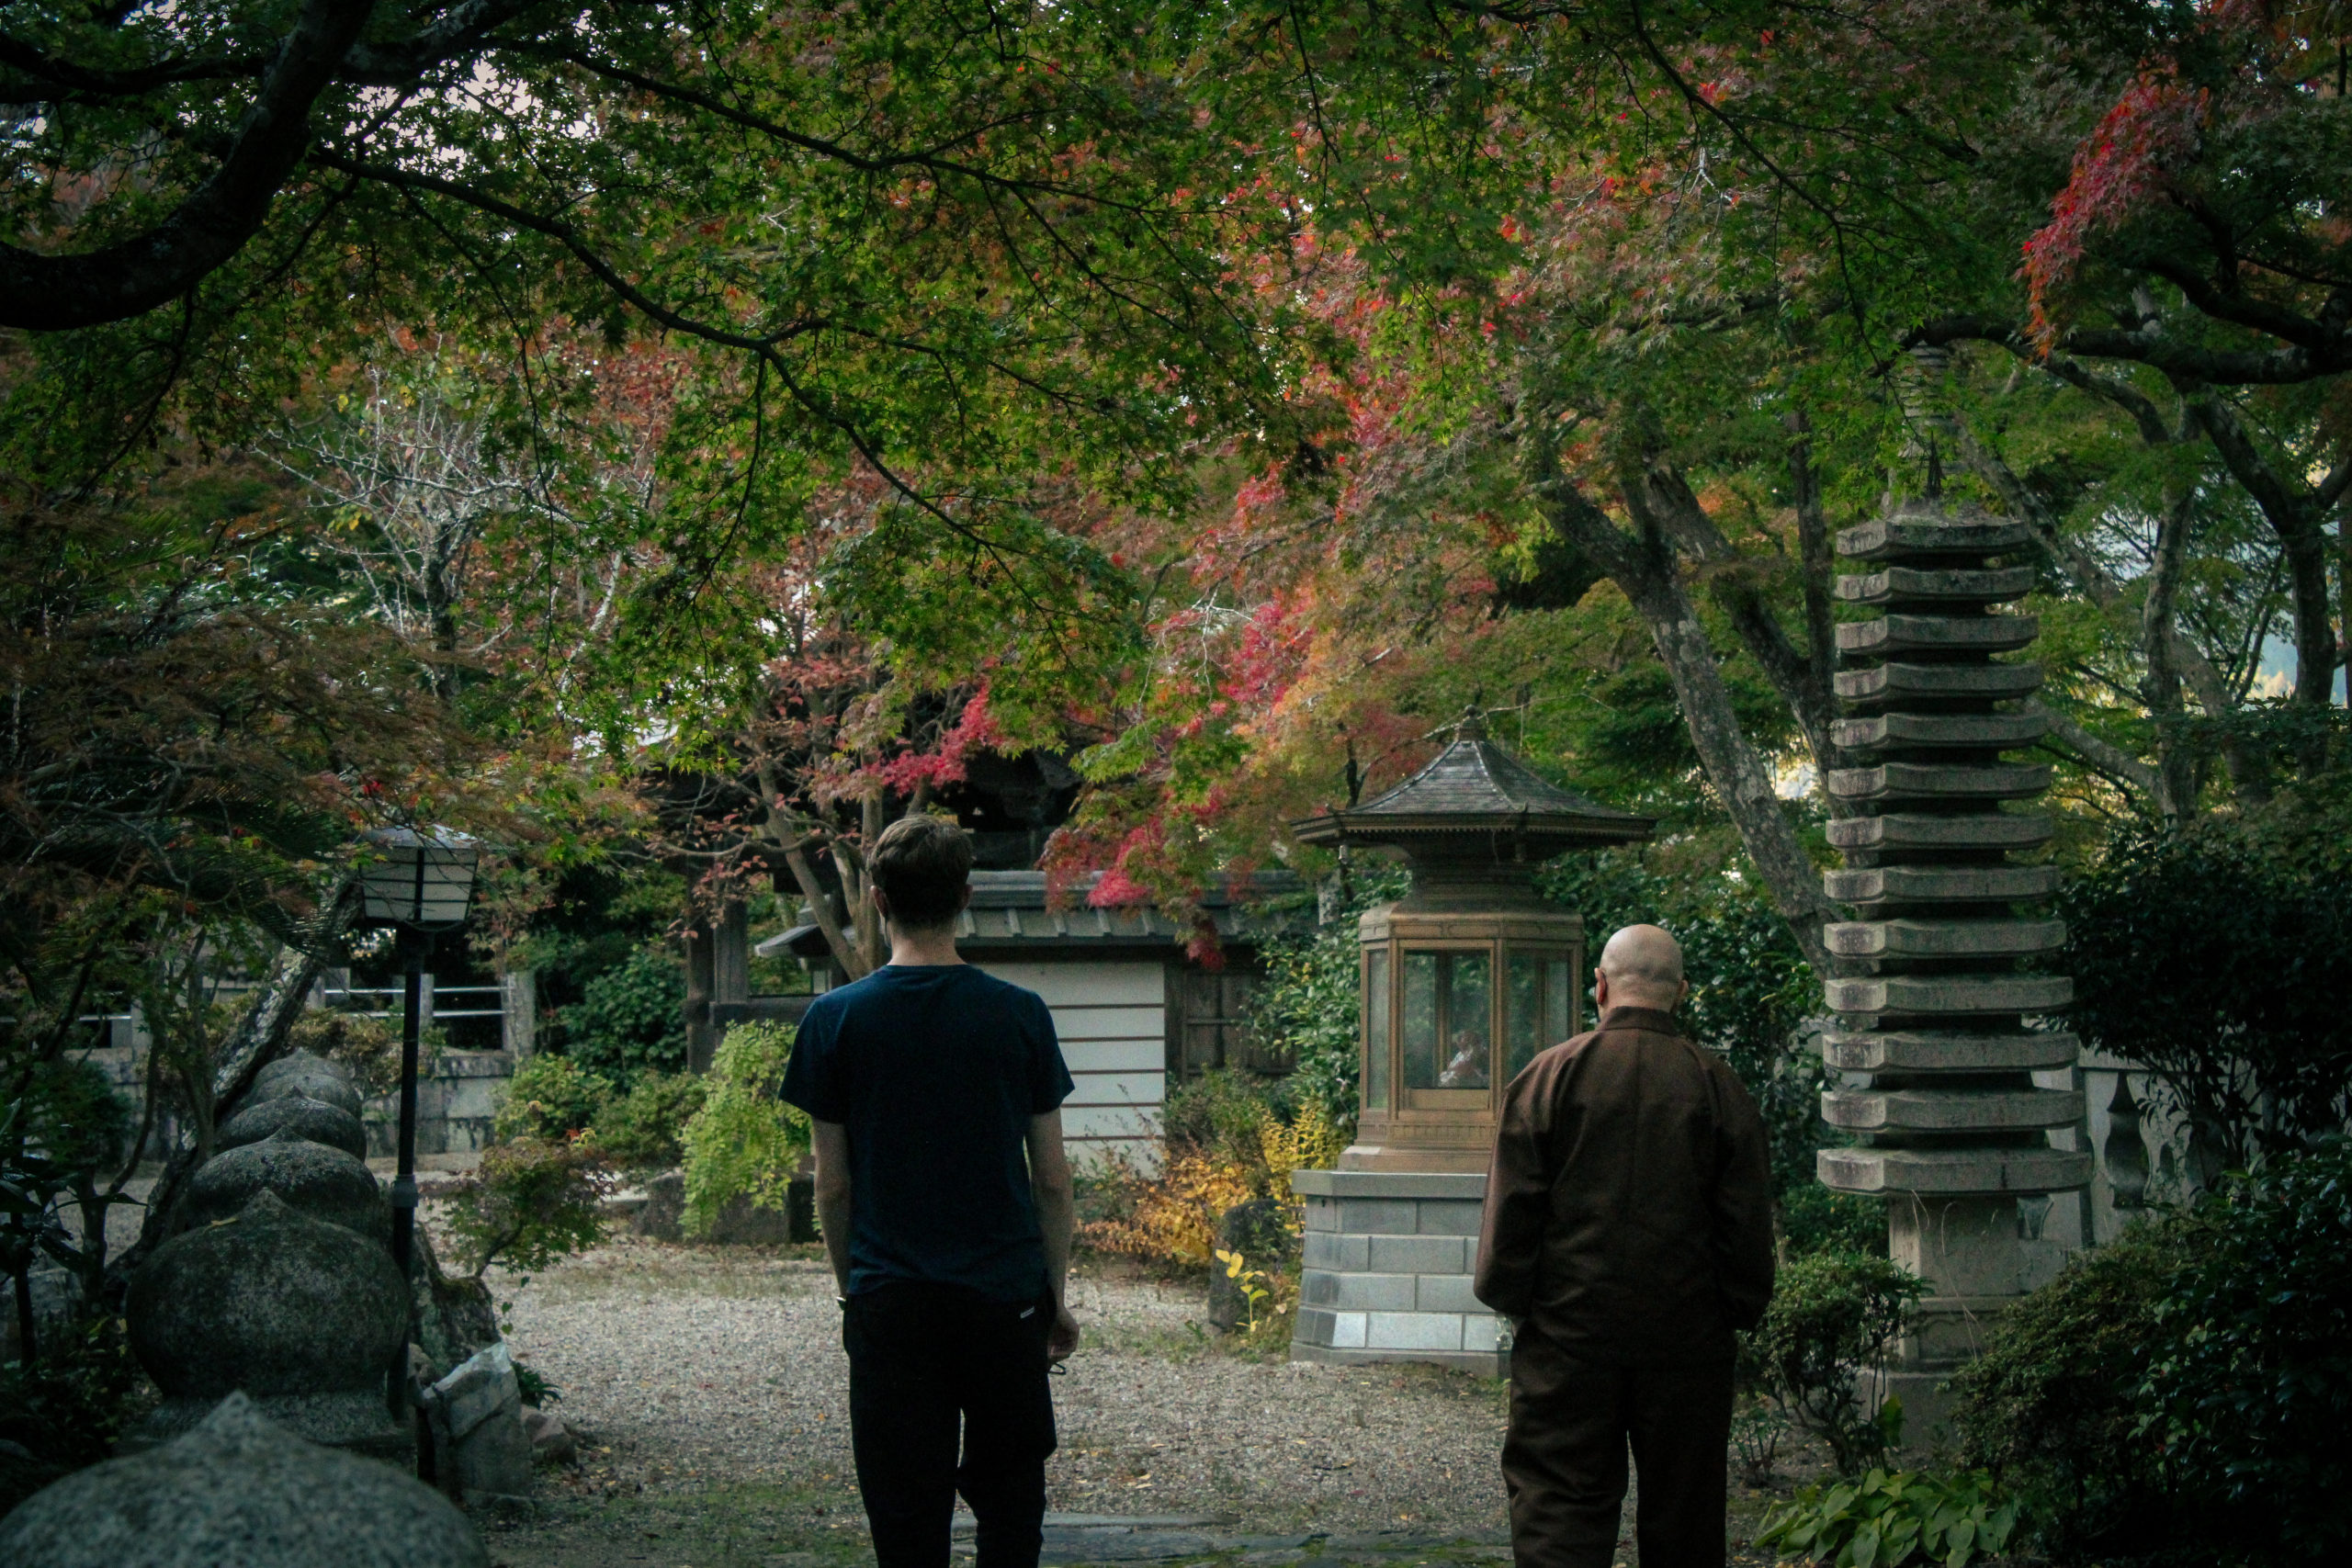 Alex and Ozeki-san face away from the camera. They look off into the distance at the scenery of Shouohouji. The trees are ripe with fall colors.